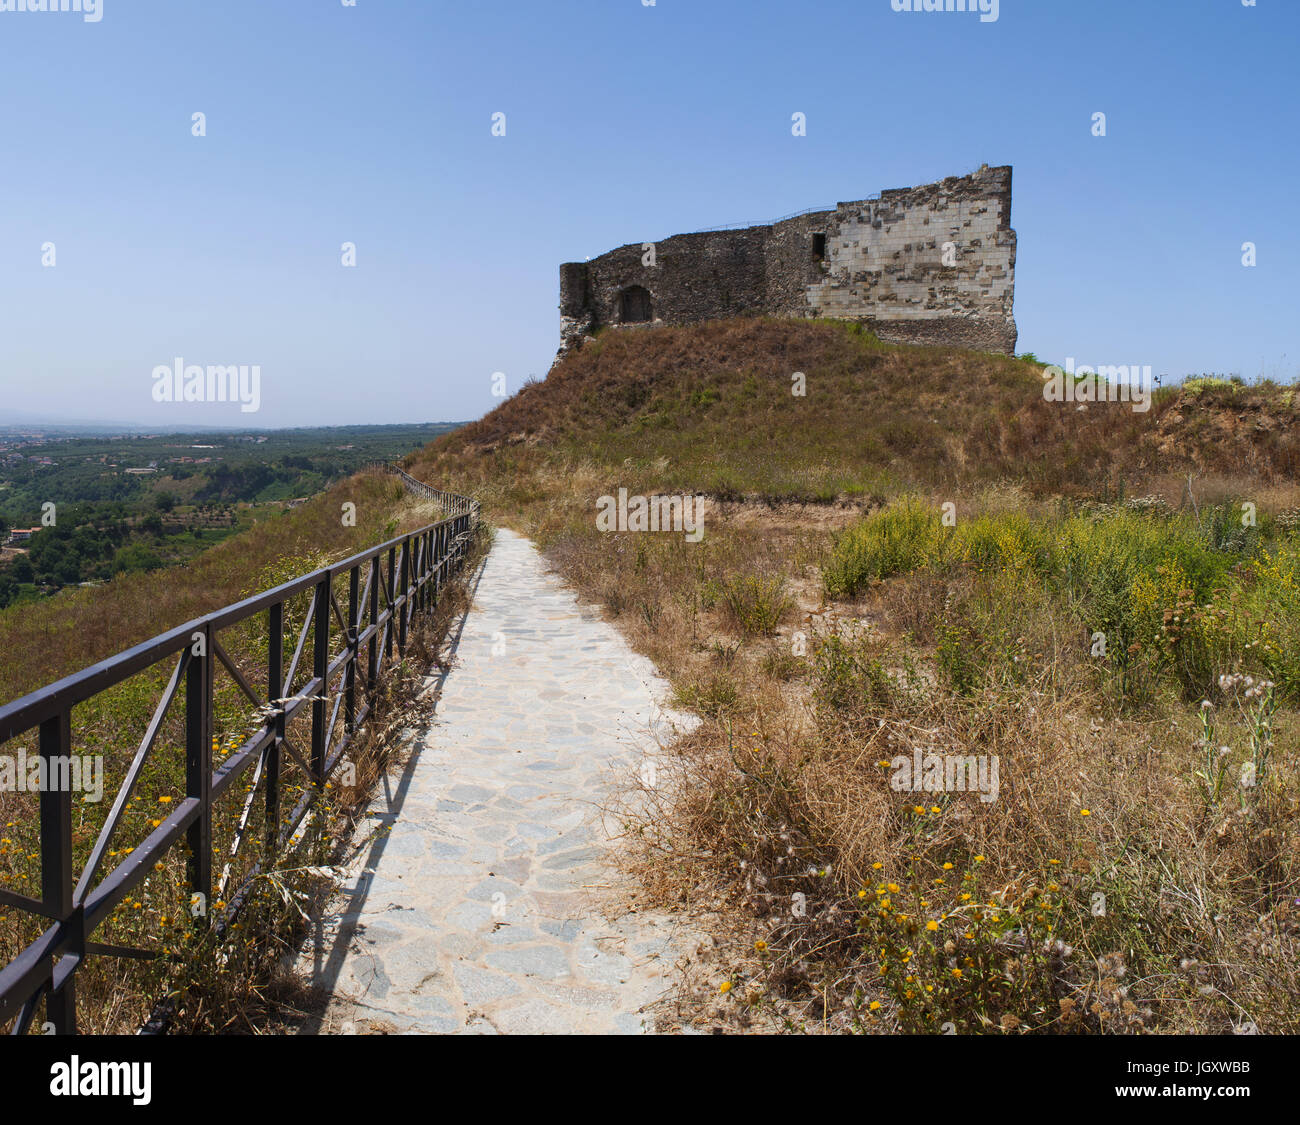 Calabria, Italy: the Norman-Hohenstaufen Castle of Vibo Valentia, built around 1000 on the top of Hipponion acropolis, now home to a state museum Stock Photo